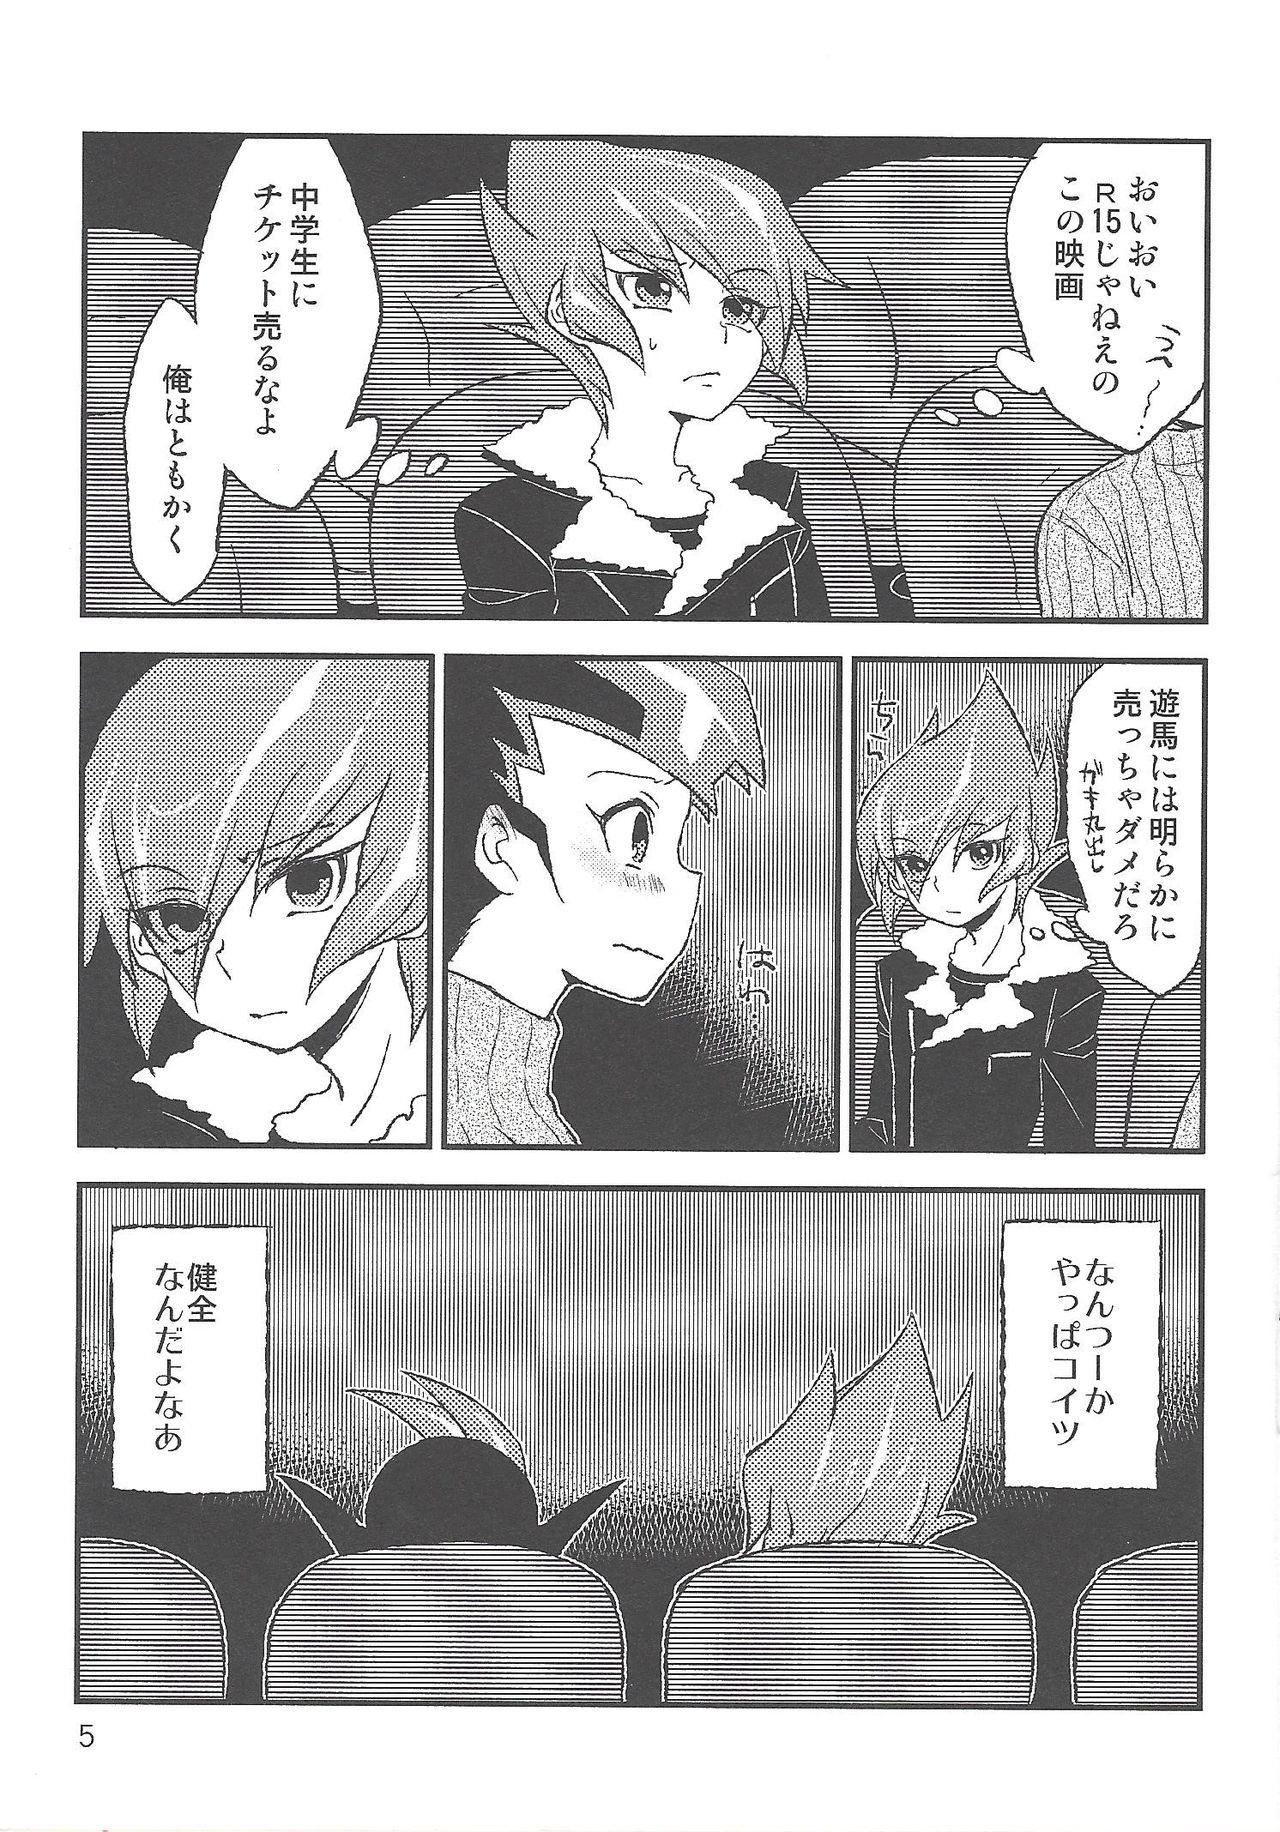 And INSTANT ROOM - Yu-gi-oh zexal Uncensored - Page 6